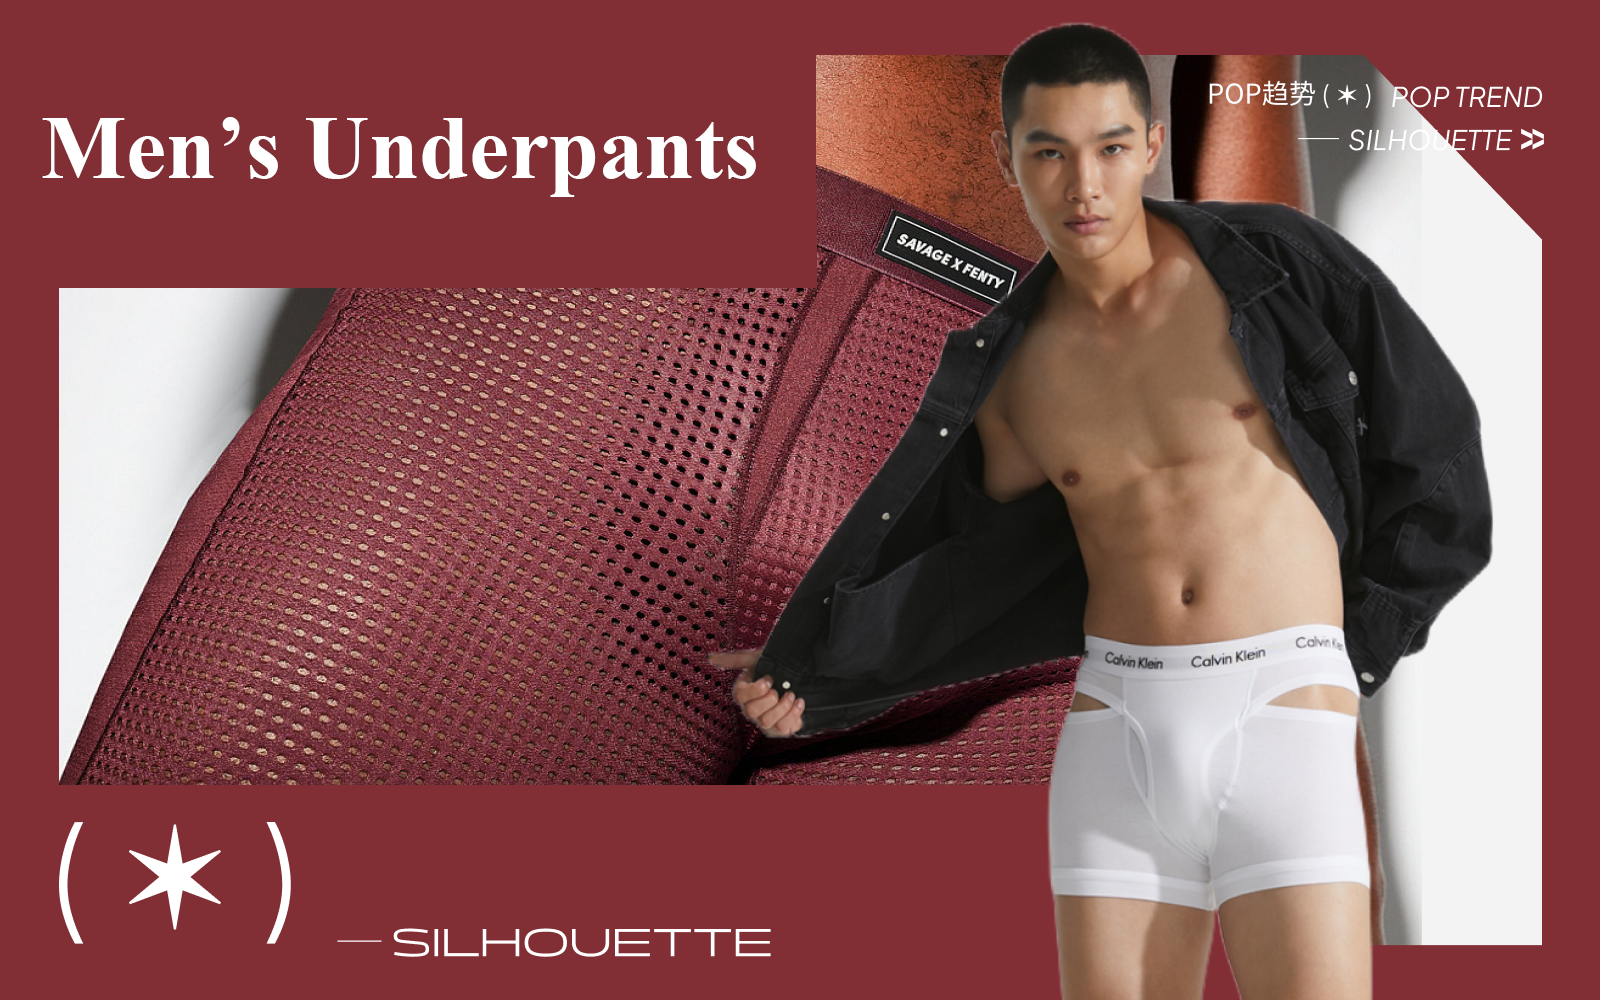 Textured Chic -- The Silhouette Trend for Men's Underpants